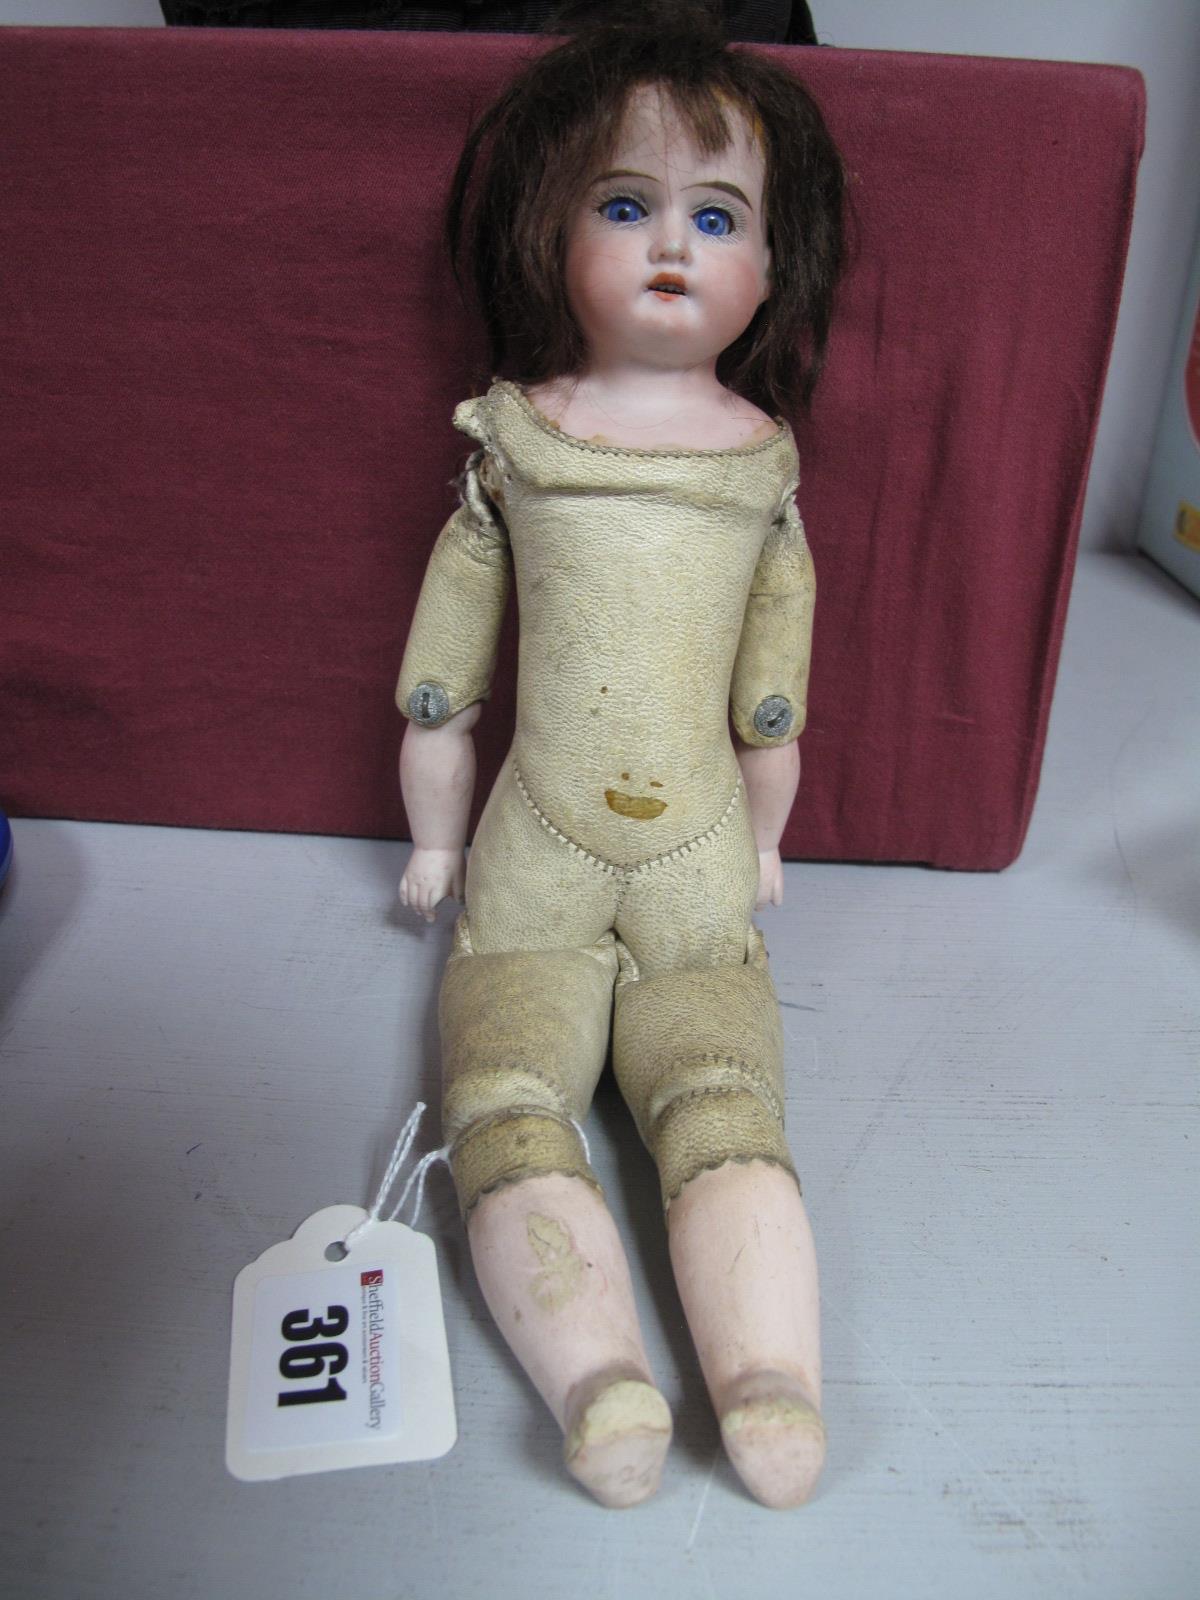 An Early XX Century Porcelain Headed Doll, with sleepy eyes and open mouth with teeth, leather